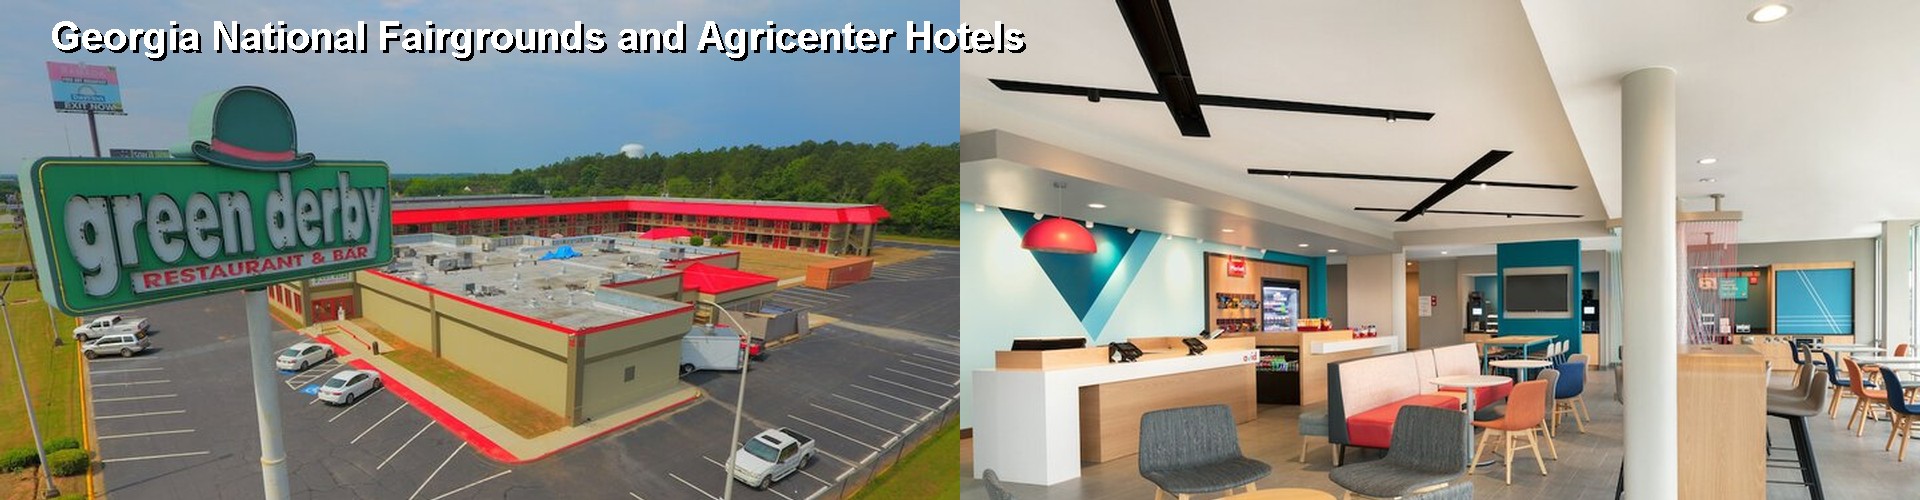 5 Best Hotels near Georgia National Fairgrounds and Agricenter